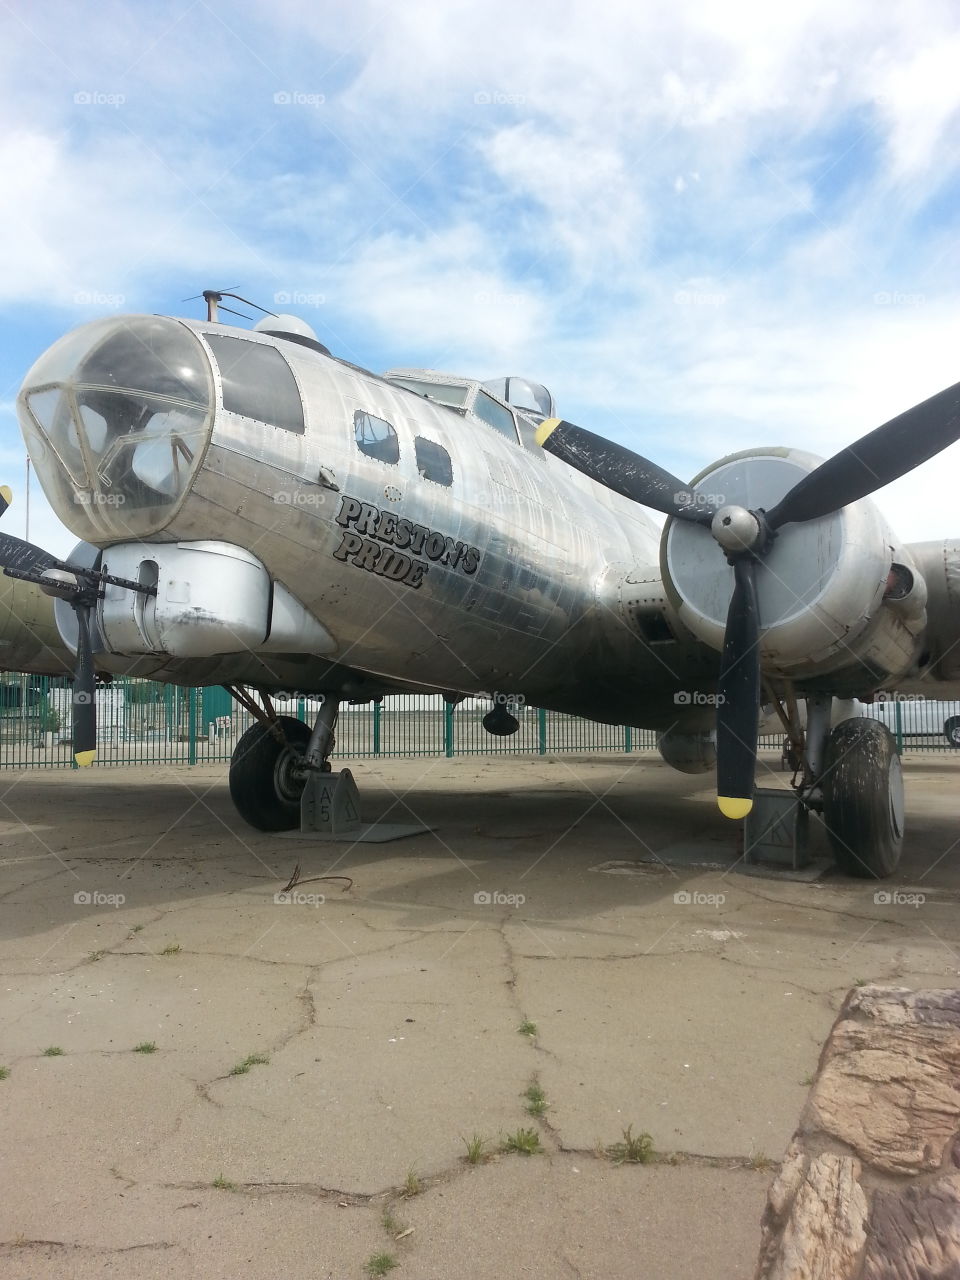 preston,s pride B17 flying fortress standing silently